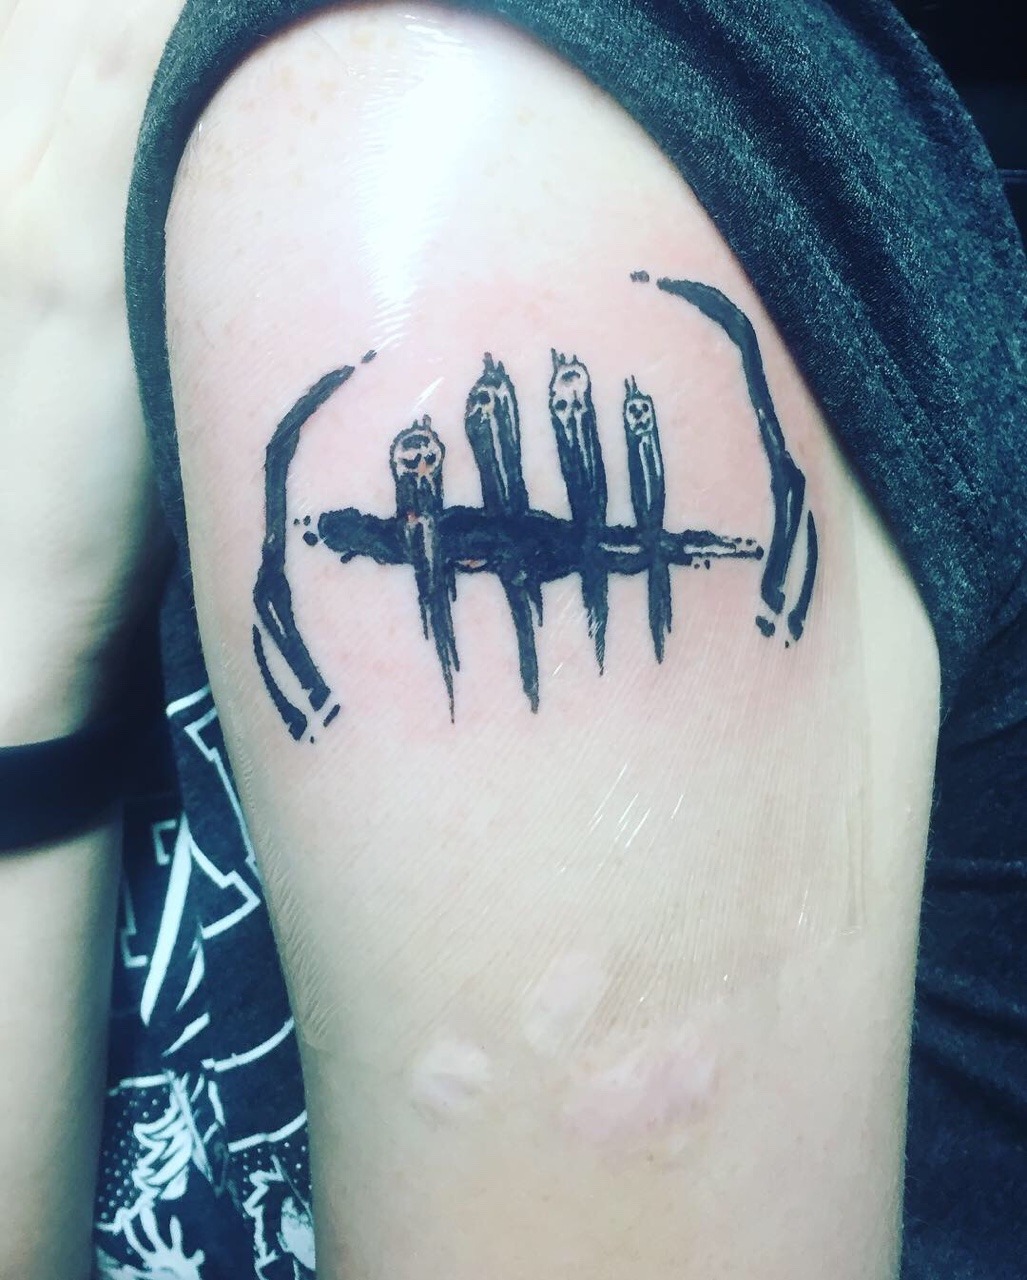 Eternal Elysium Tattoos  Dead By Daylight tattoo done today Thanks for  looking  Facebook